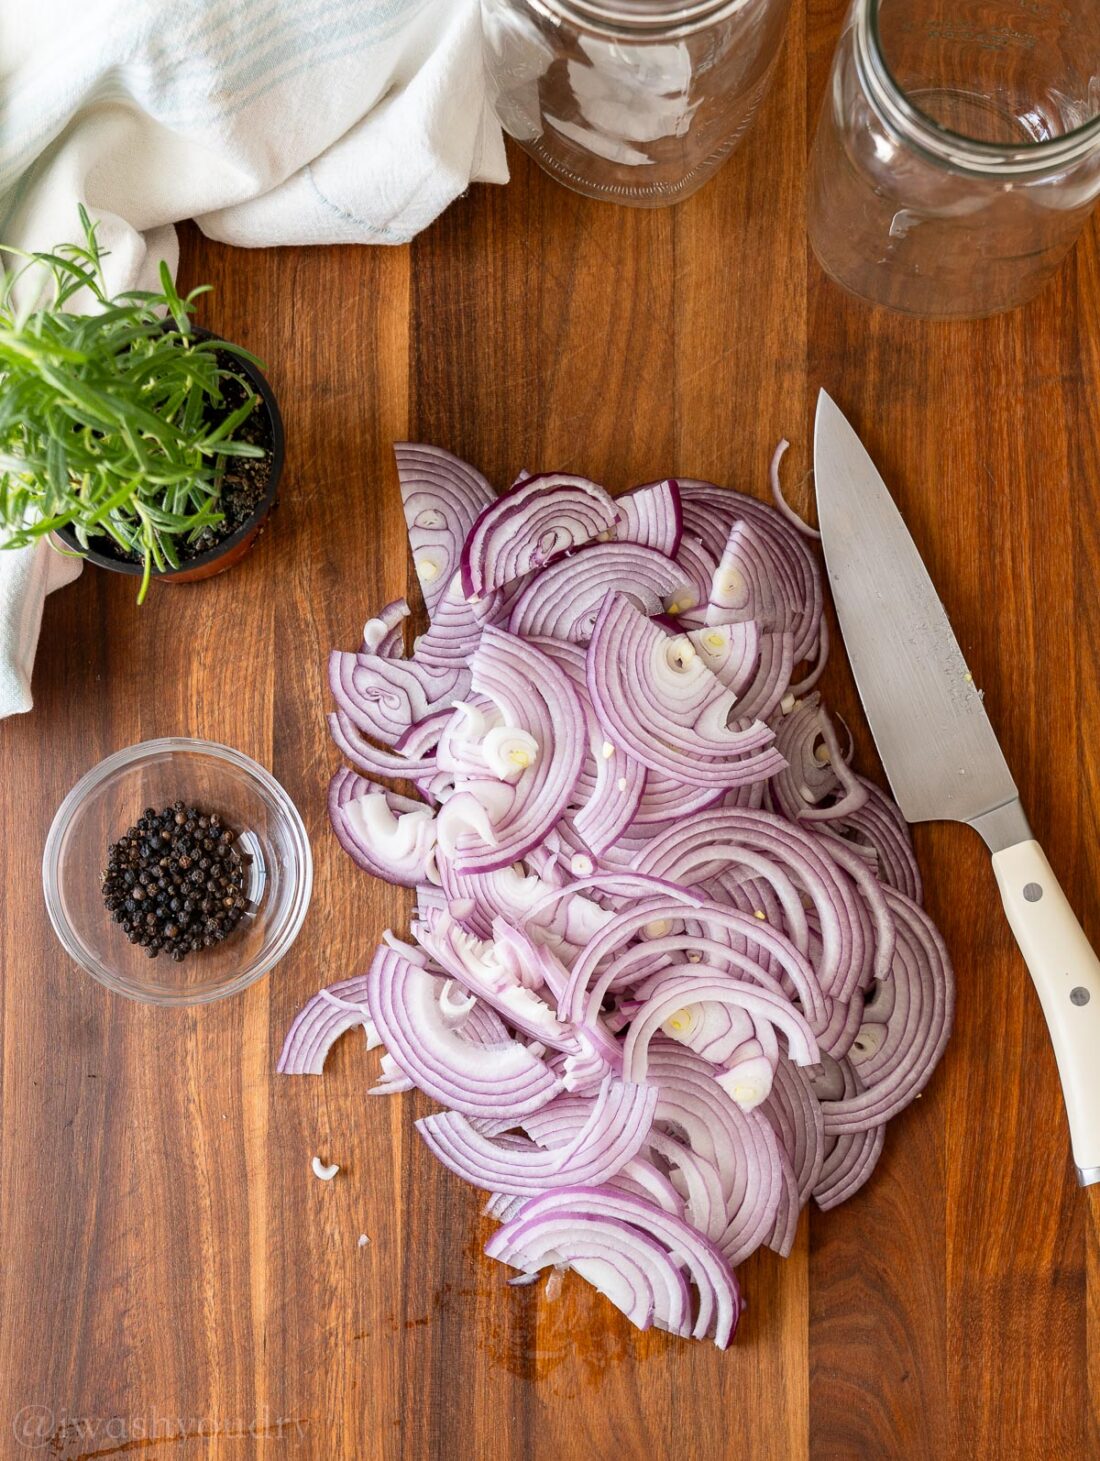 Sliced red onions on wood cutting board with rosemary and bowl of peppercorns. 